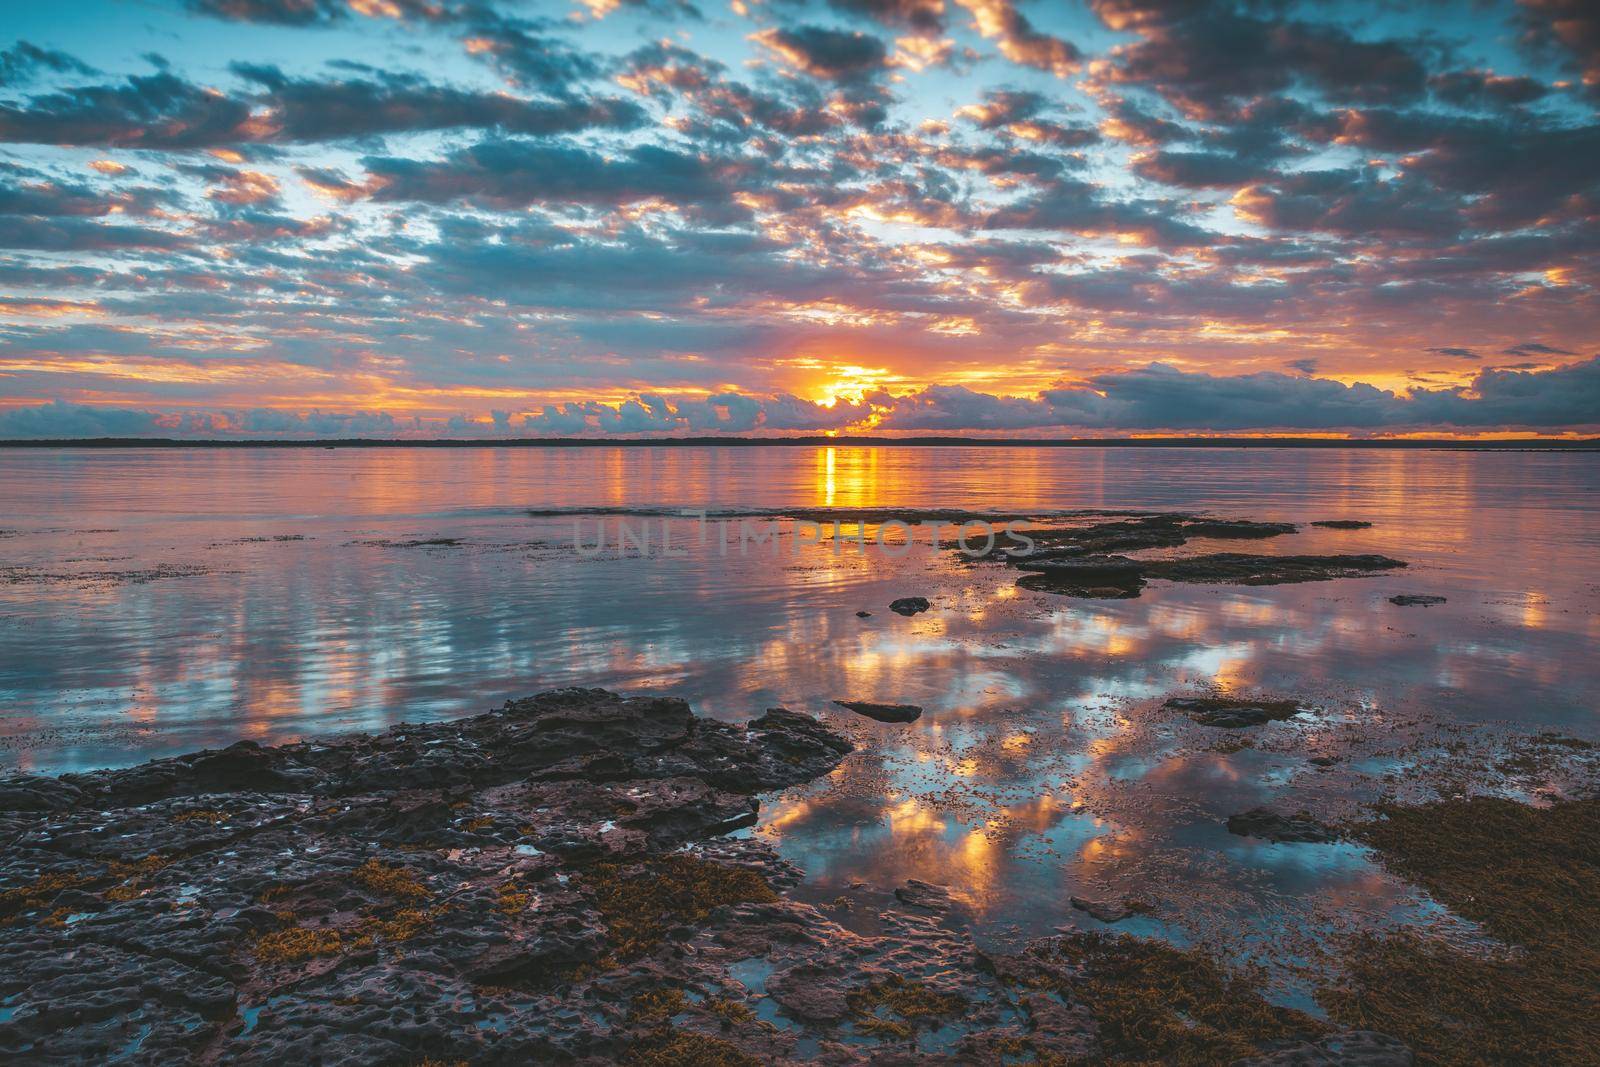 Tranquil waters and reflections of Jervis Bay by lovleah